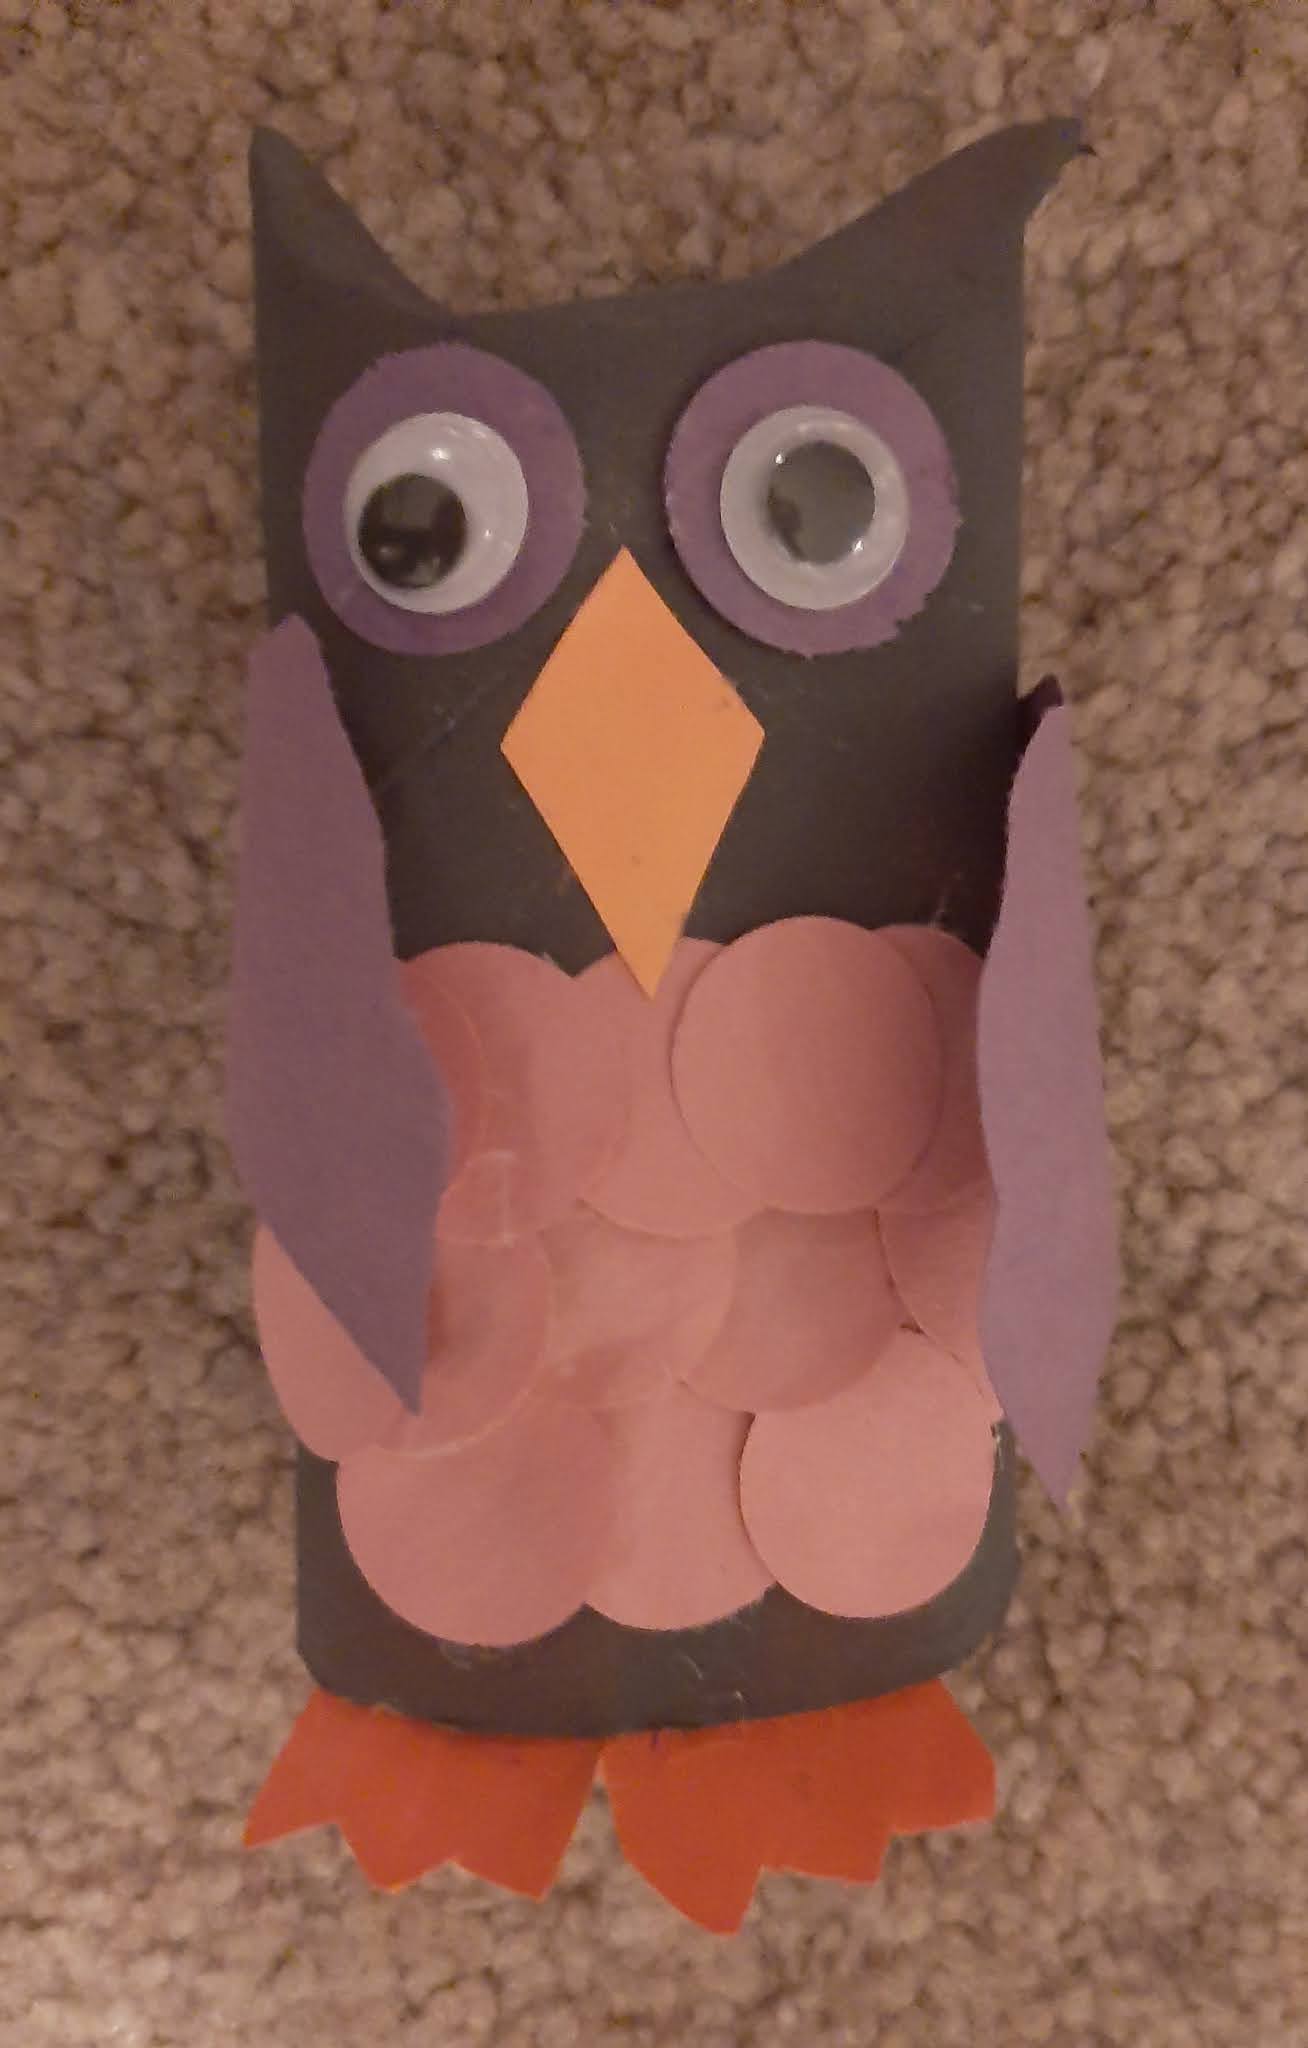 Danielle's Storytime Tales and More: Nocturnal Animal Crafts for ...